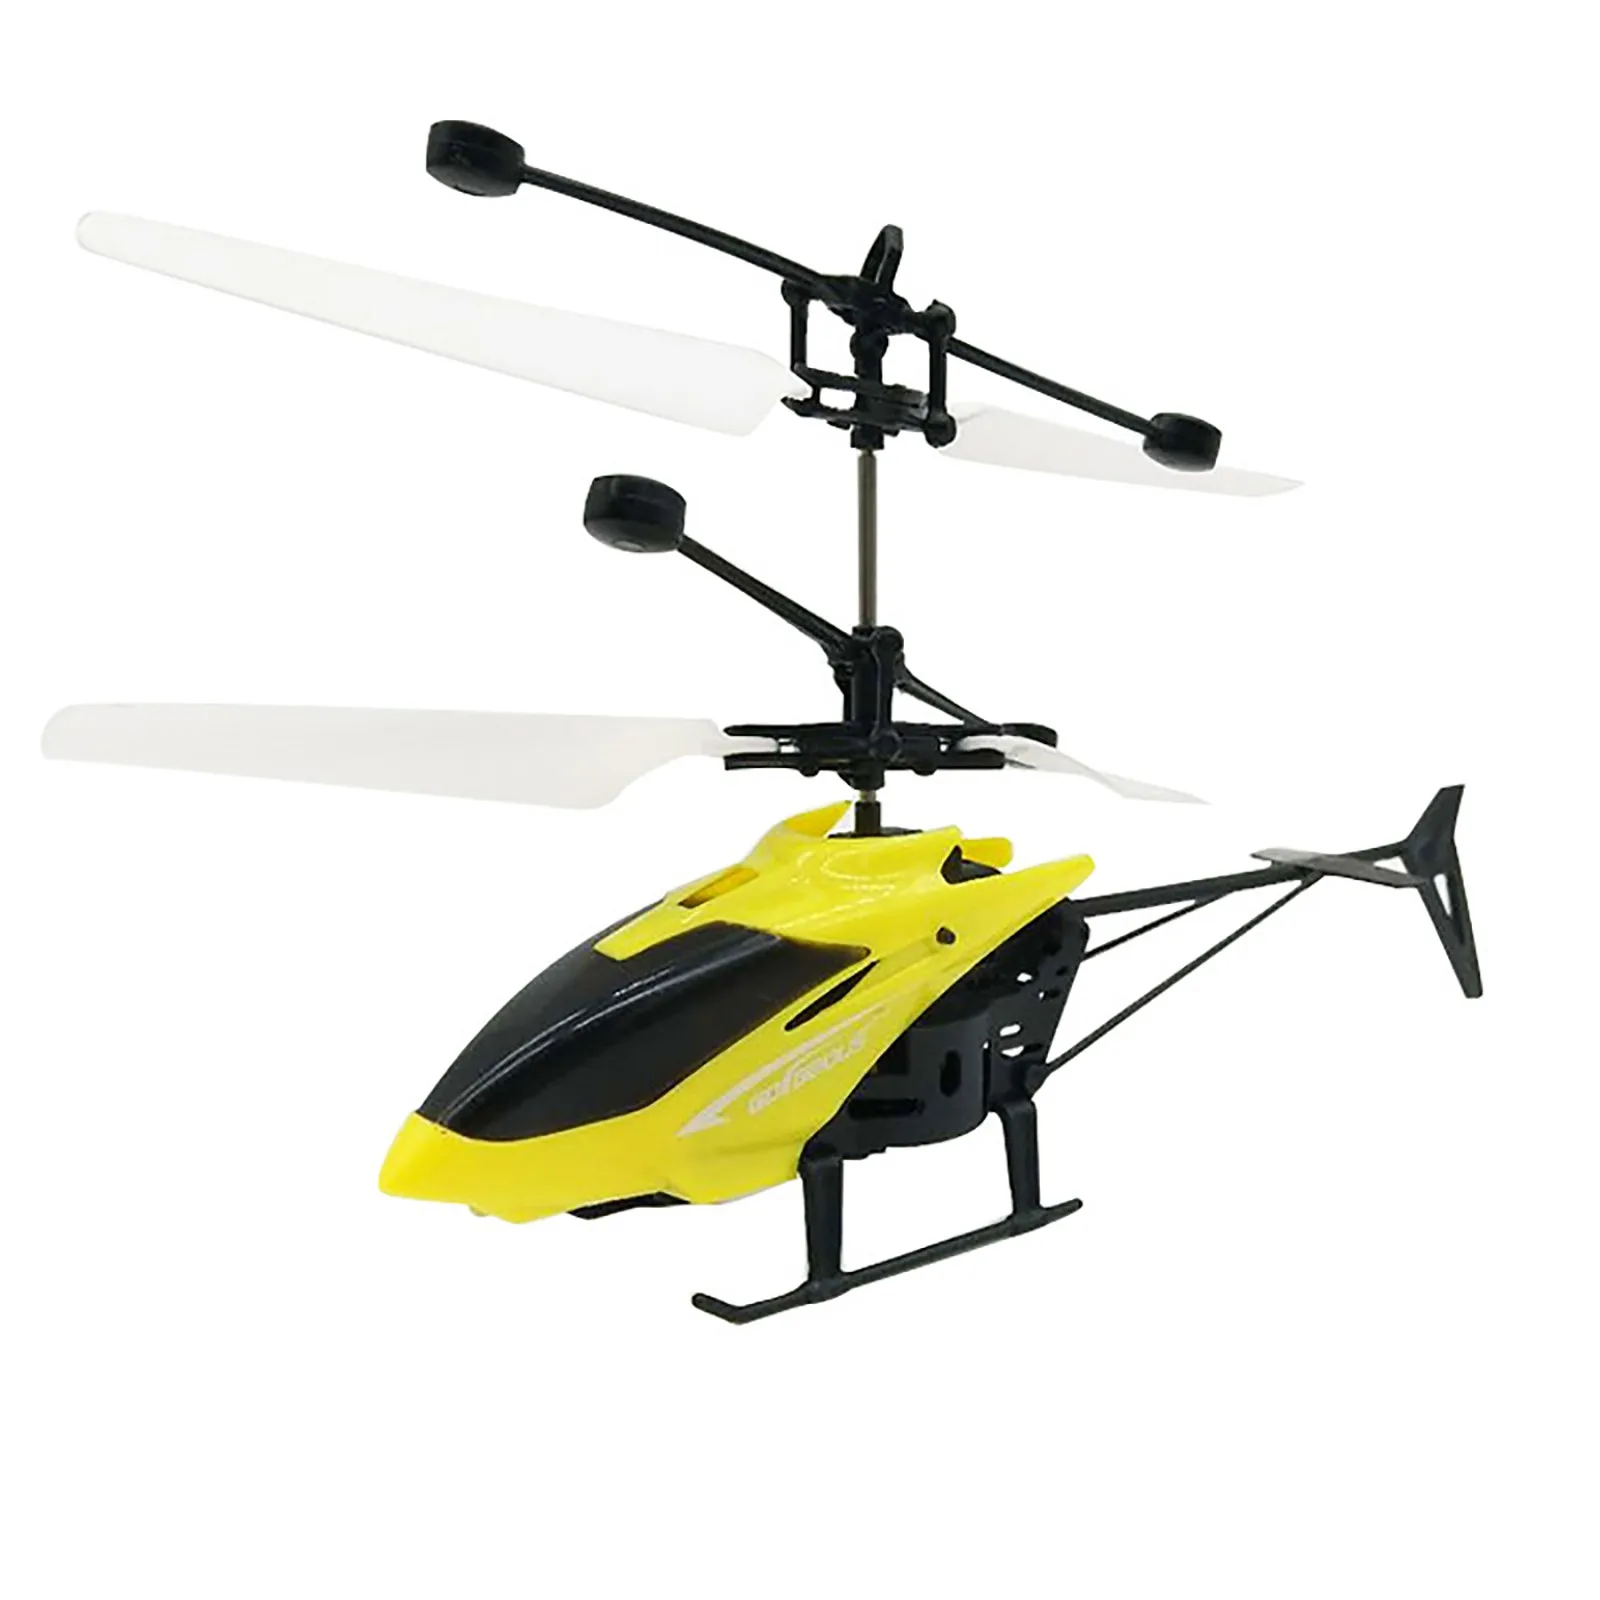 Muised Chirstmas Gifts for Boys Remote Control Helicopter Children RC Helicopter Aeroplane Gift RC Helicopter Birthday Gift 